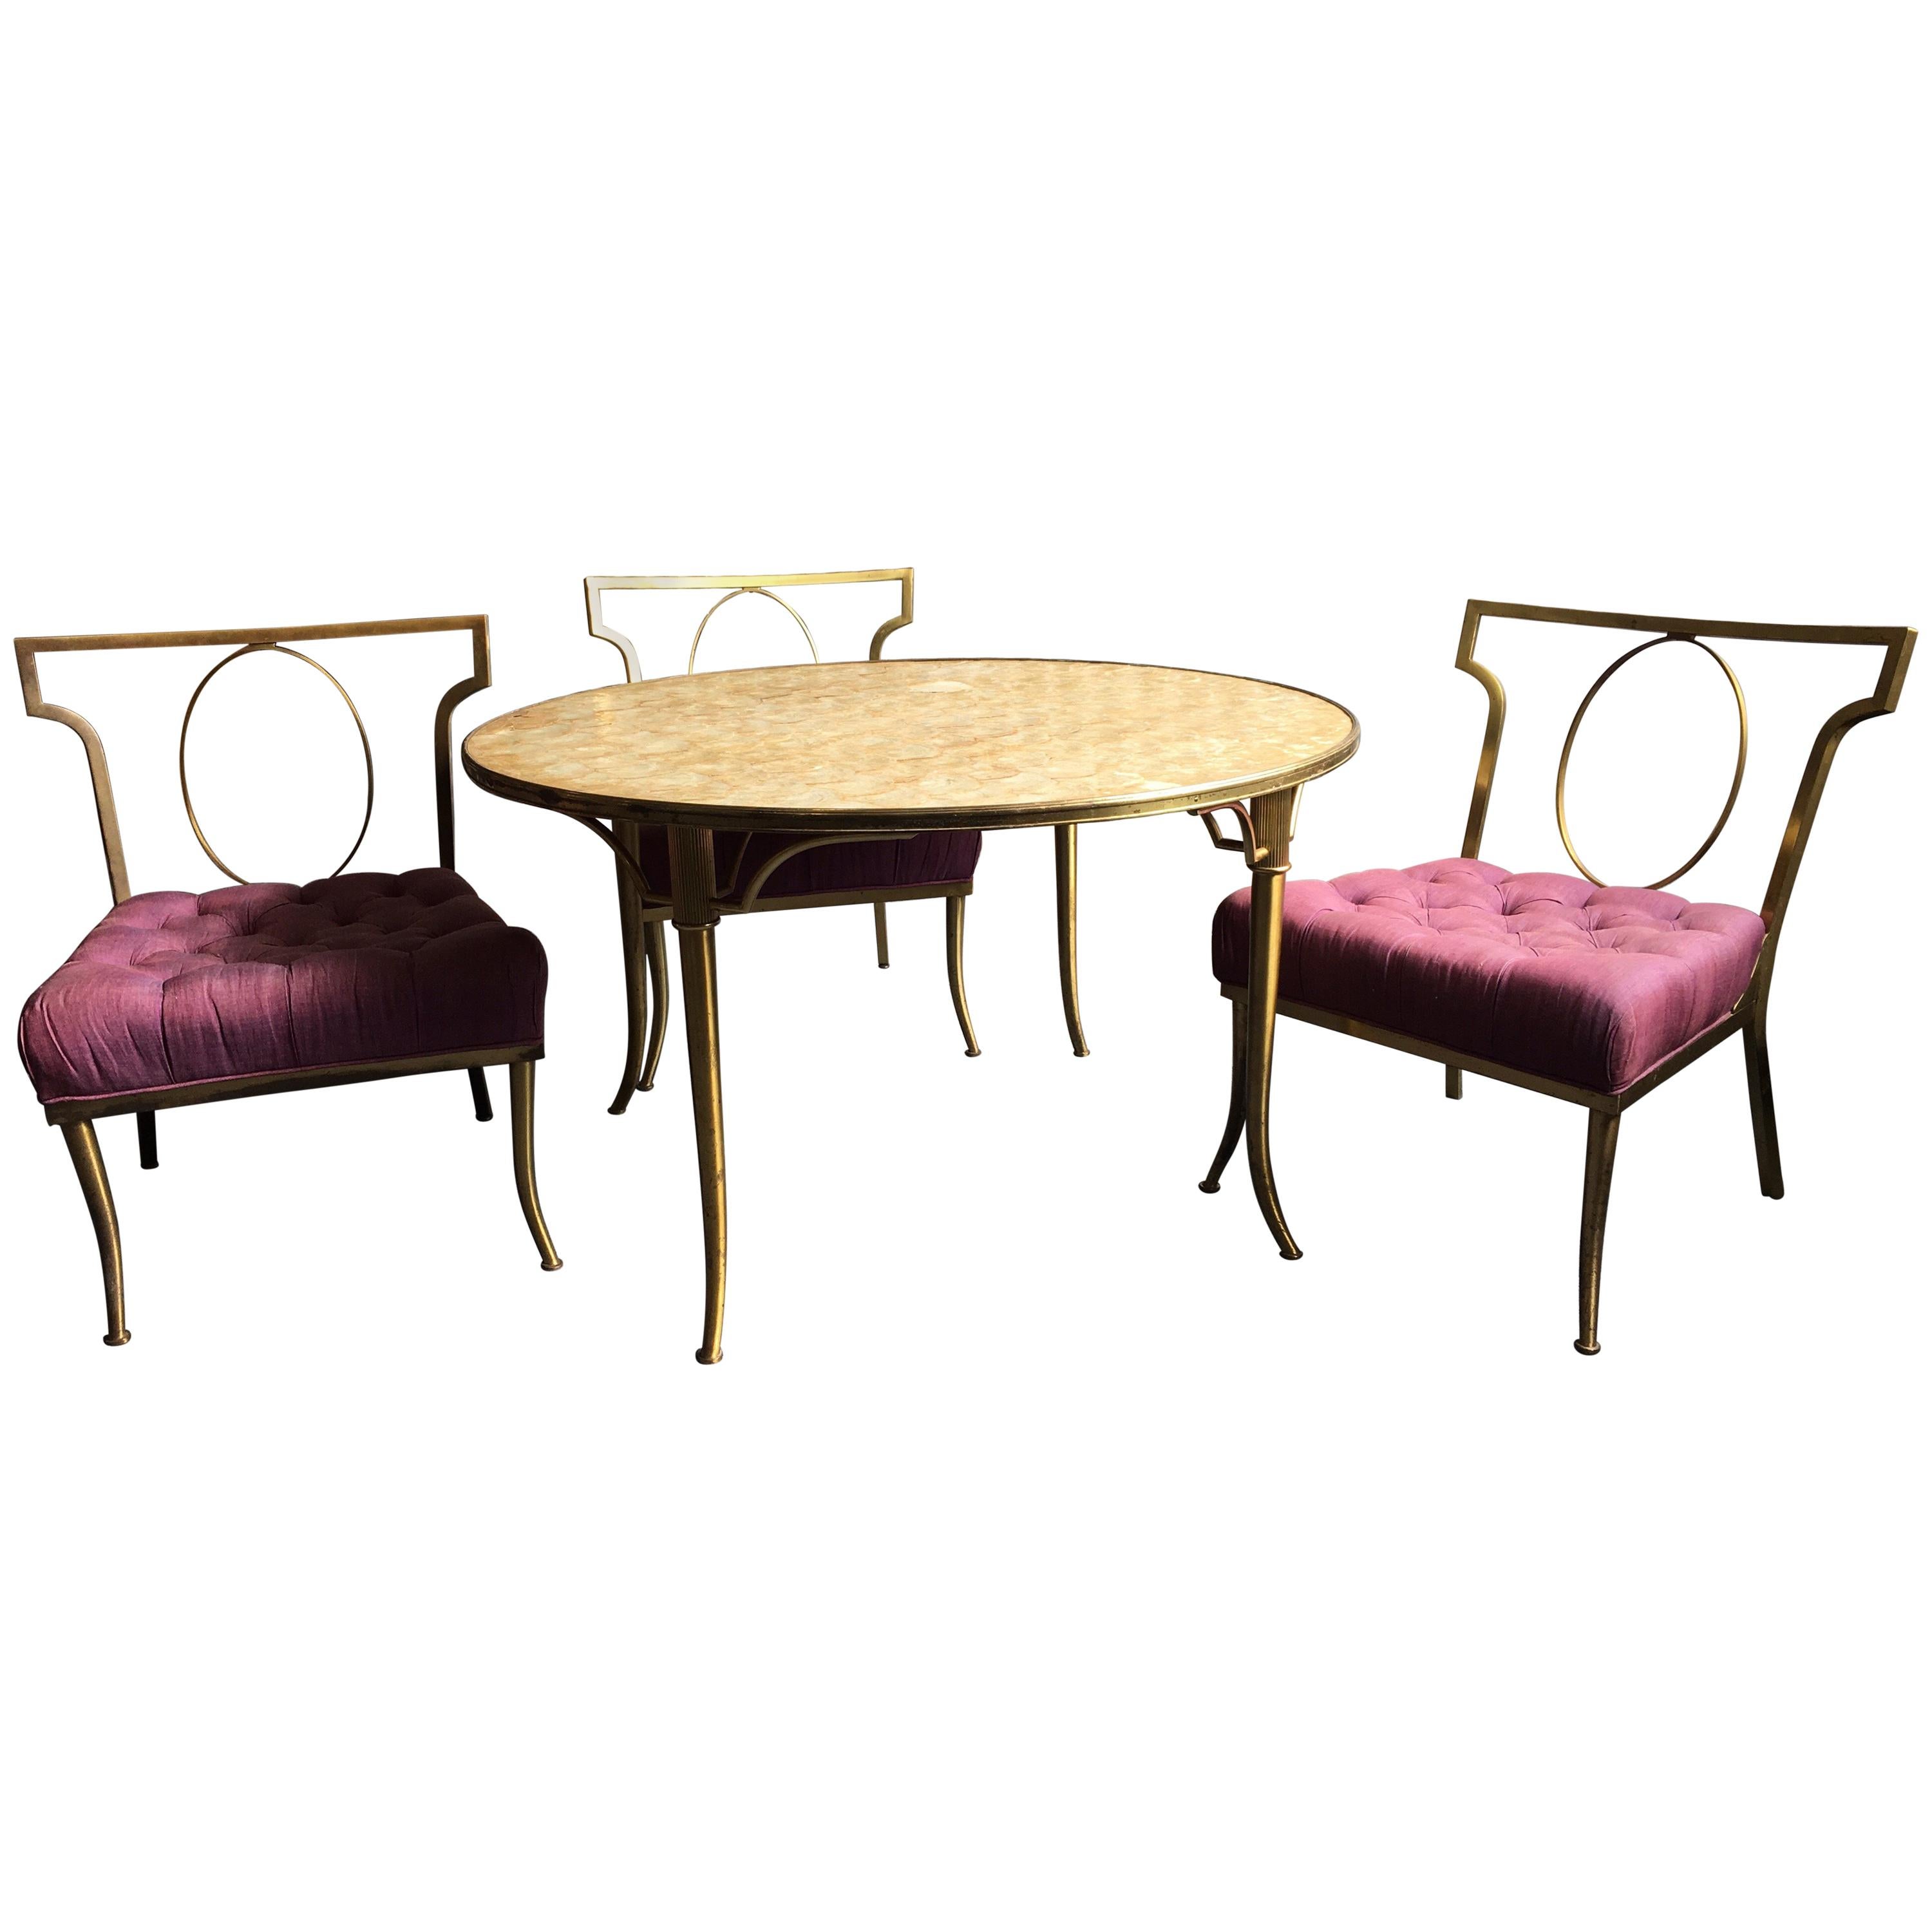 Set of Three Low Brass Directoire Style Chairs with Round Capiz Shell Top Table